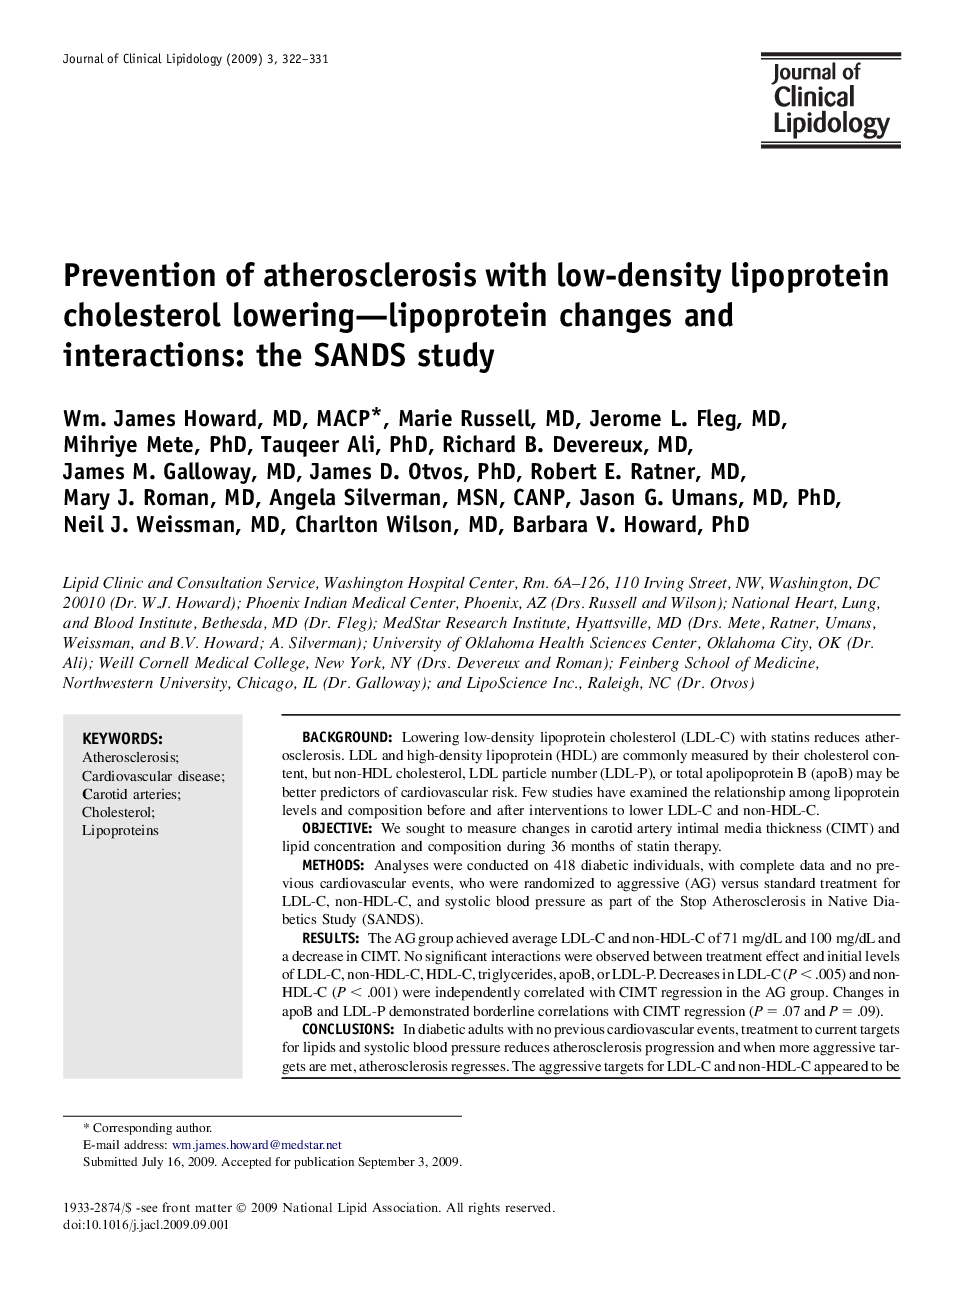 Prevention of atherosclerosis with low-density lipoprotein cholesterol lowering-lipoprotein changes and interactions: the SANDS study